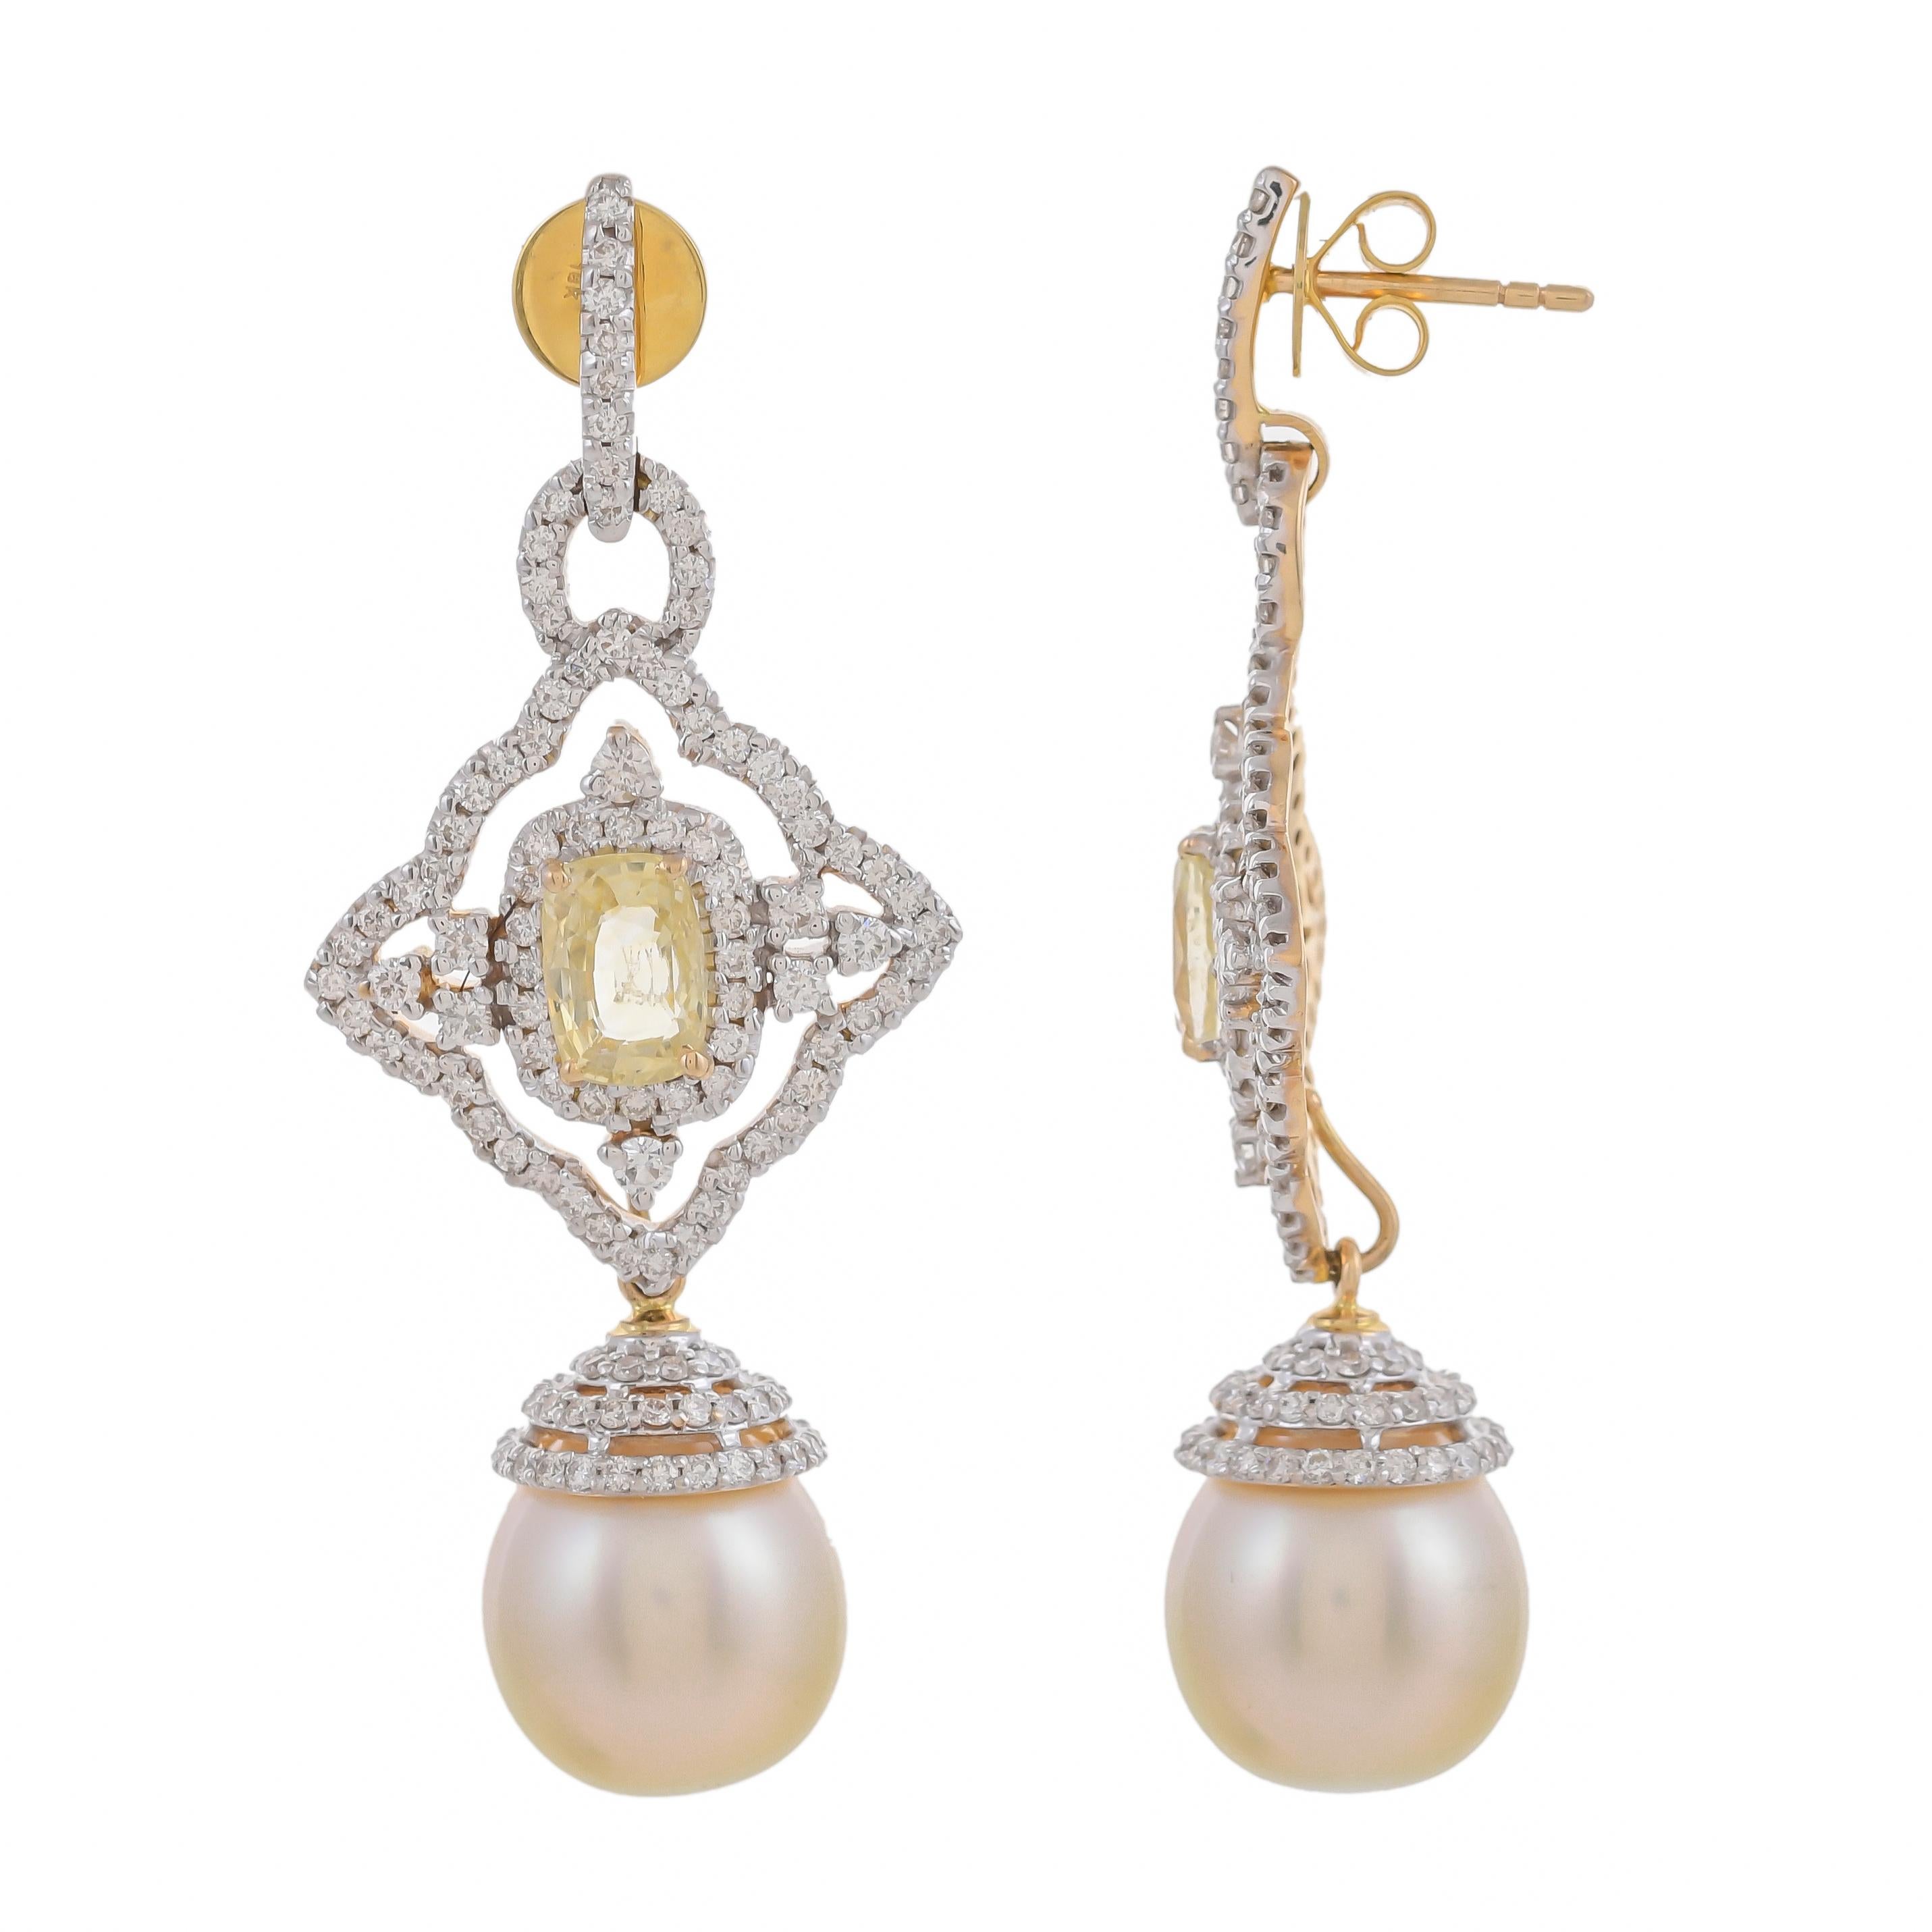 A cocktail earring with a fine octagon-shaped sapphire at the centre. The centre stone has an immediate surround of full-cut diamonds further suspended with South Sea Pearl weighing approximately 35.23 carats with a diamond-set cap, with a total